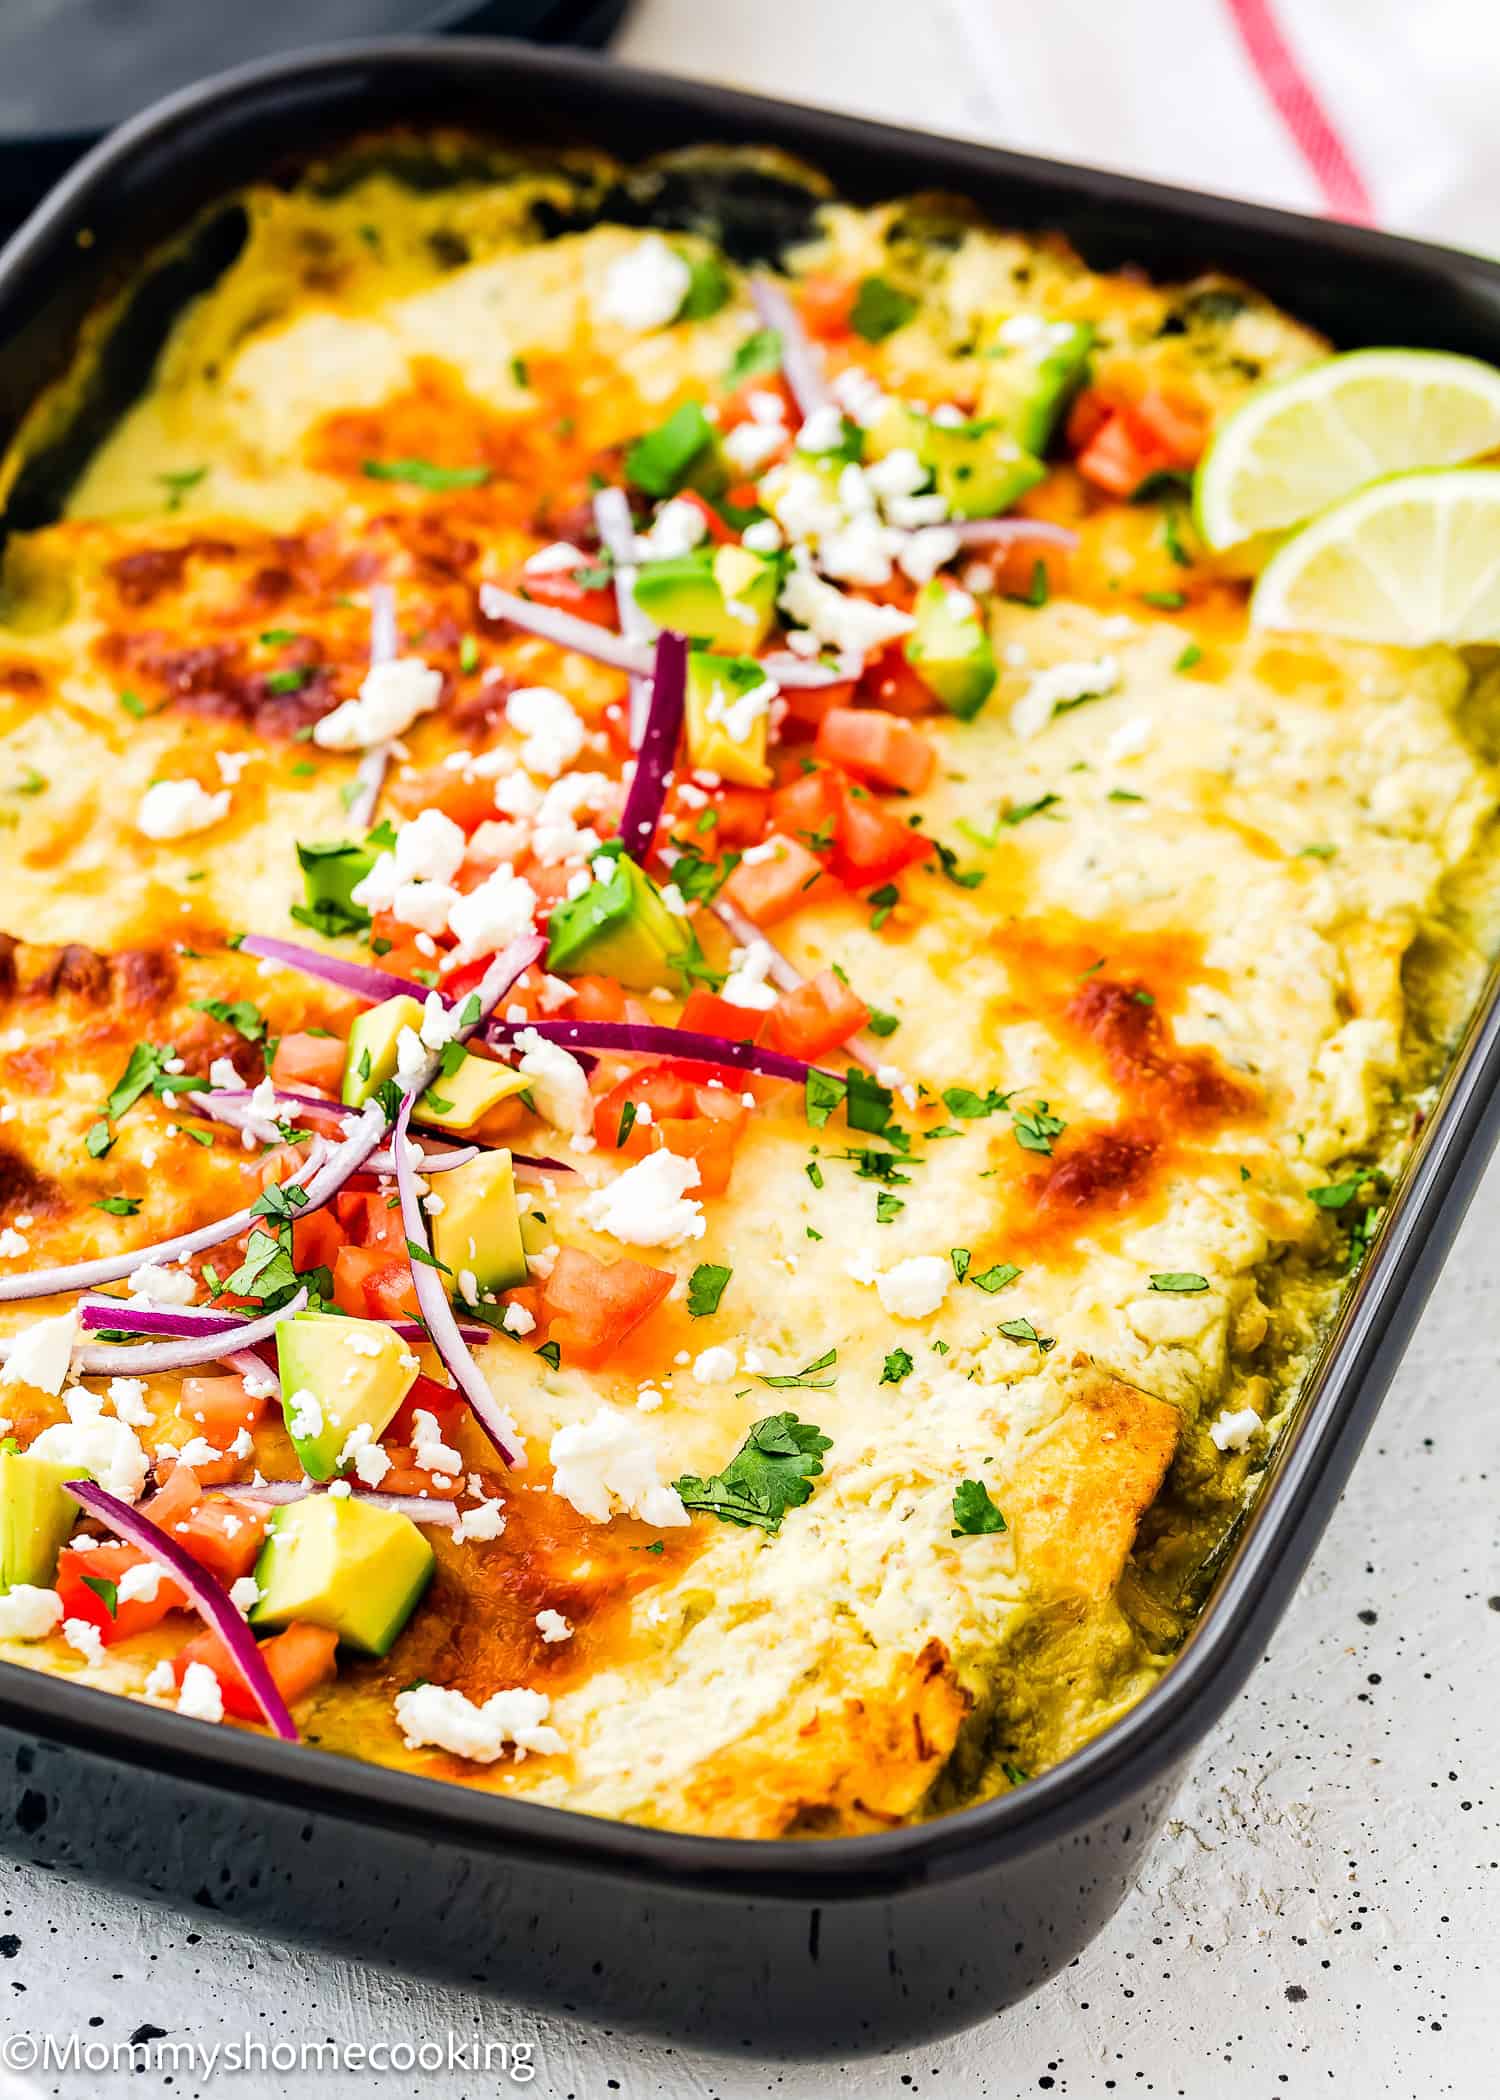 Super Easy Enchiladas Suizas with topping in a black casserole dish.